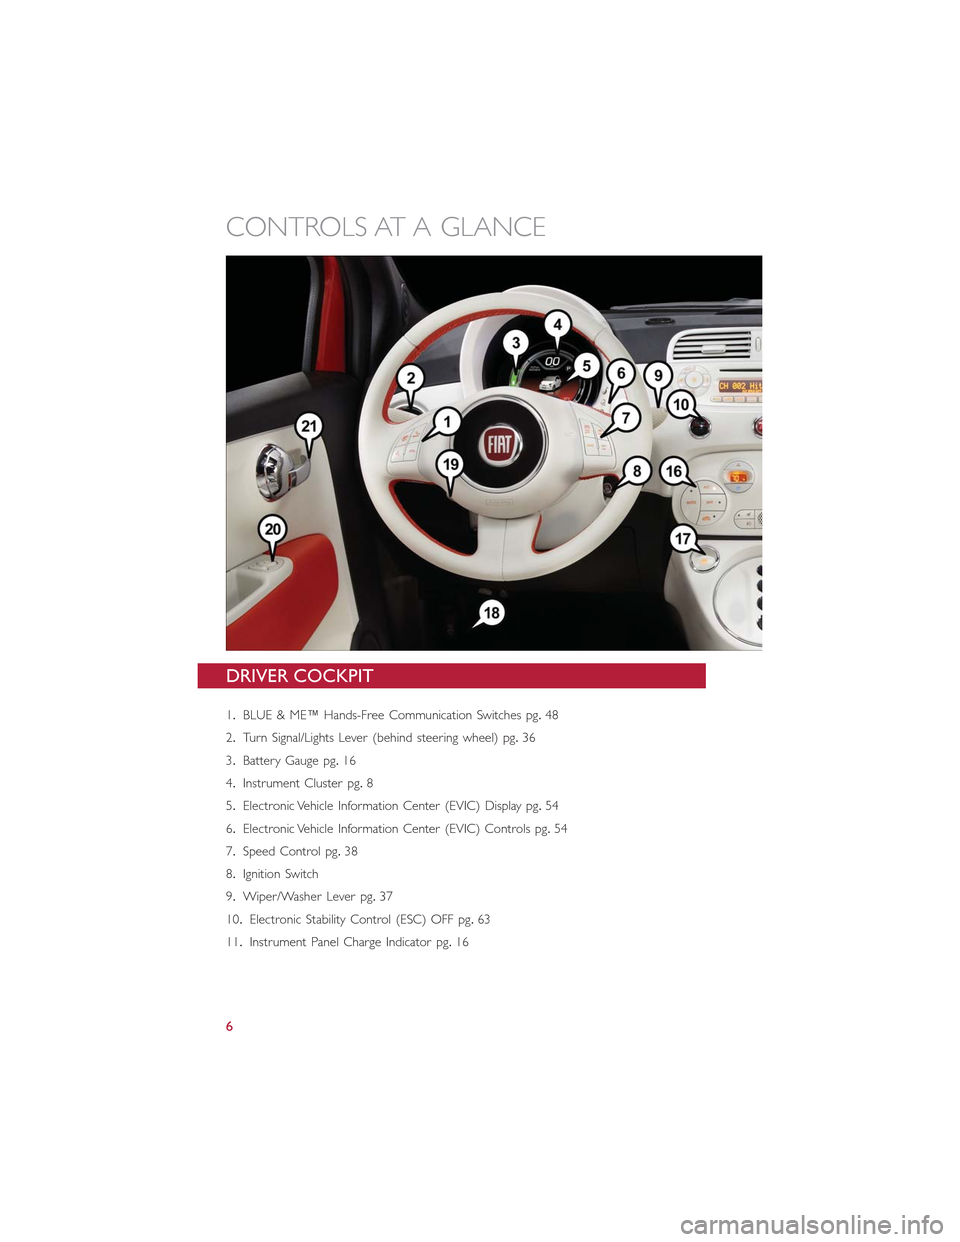 FIAT 500E 2015 2.G User Guide DRIVER COCKPIT
1.BLUE & ME™ Hands-Free Communication Switches pg.48
2.Turn Signal/Lights Lever (behind steering wheel) pg.36
3.Battery Gauge pg.16
4.Instrument Cluster pg.8
5.Electronic Vehicle Info